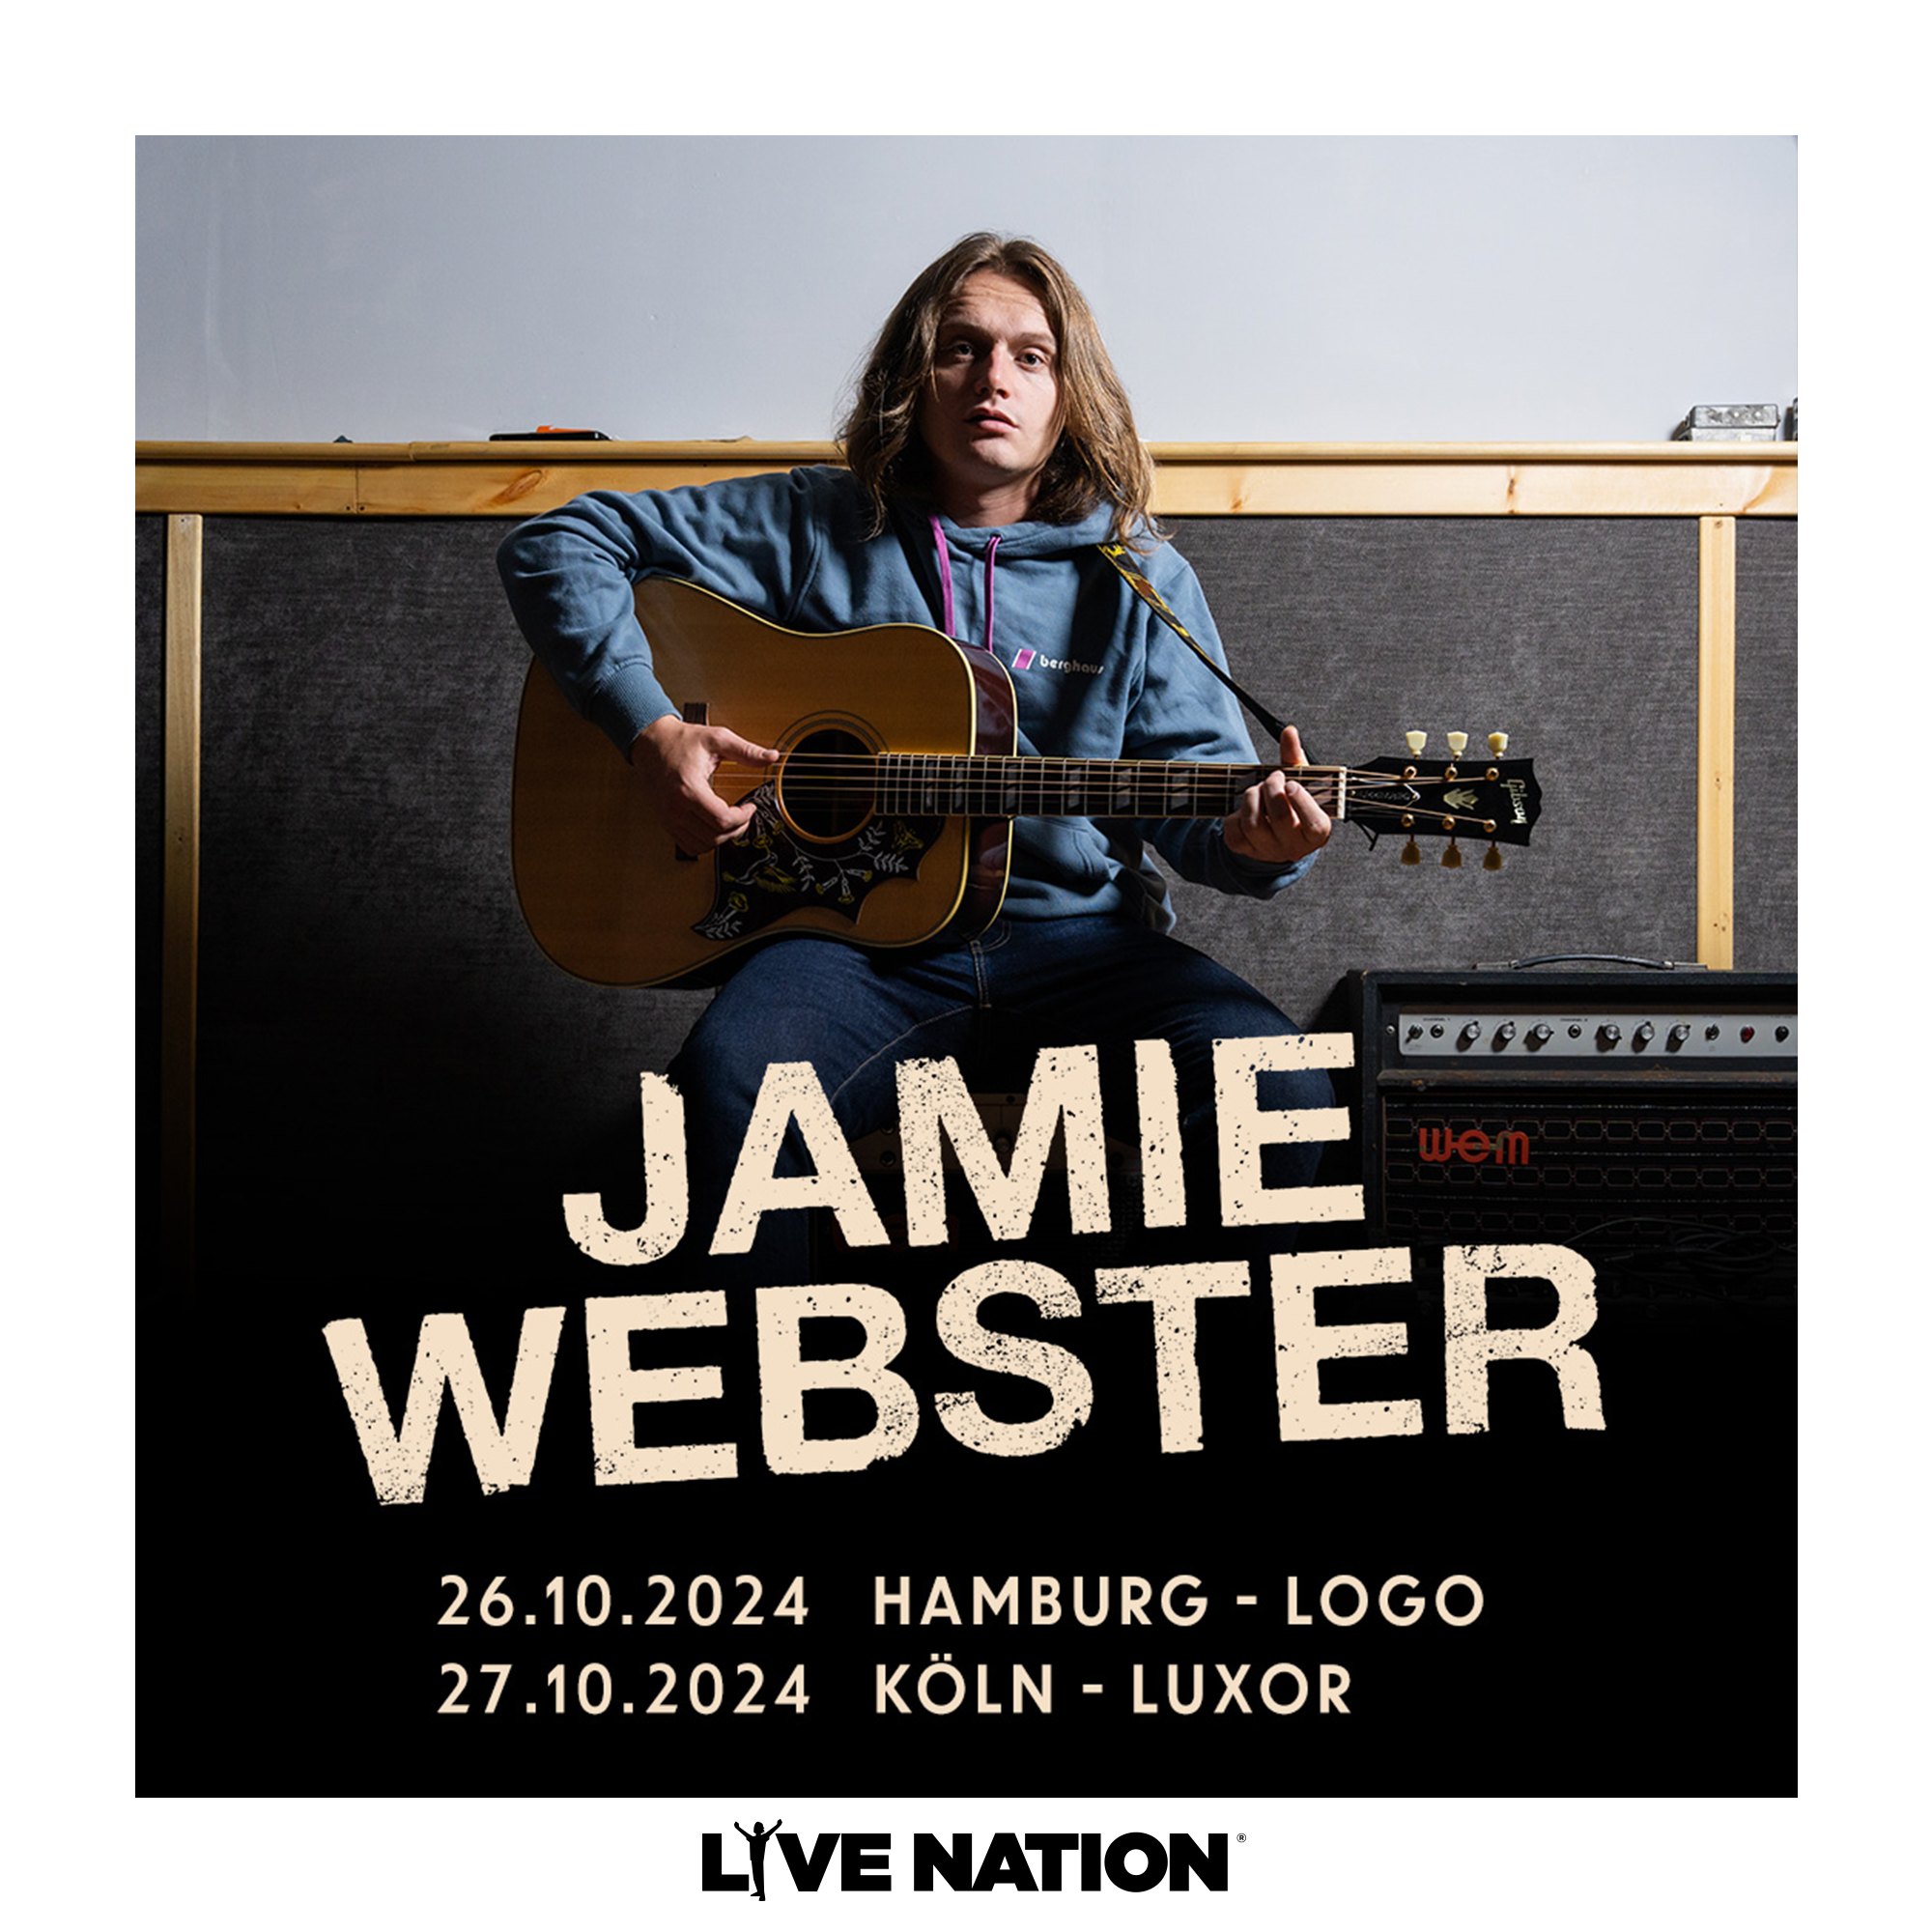 Jamie Webster at Luxor Cologne Tickets